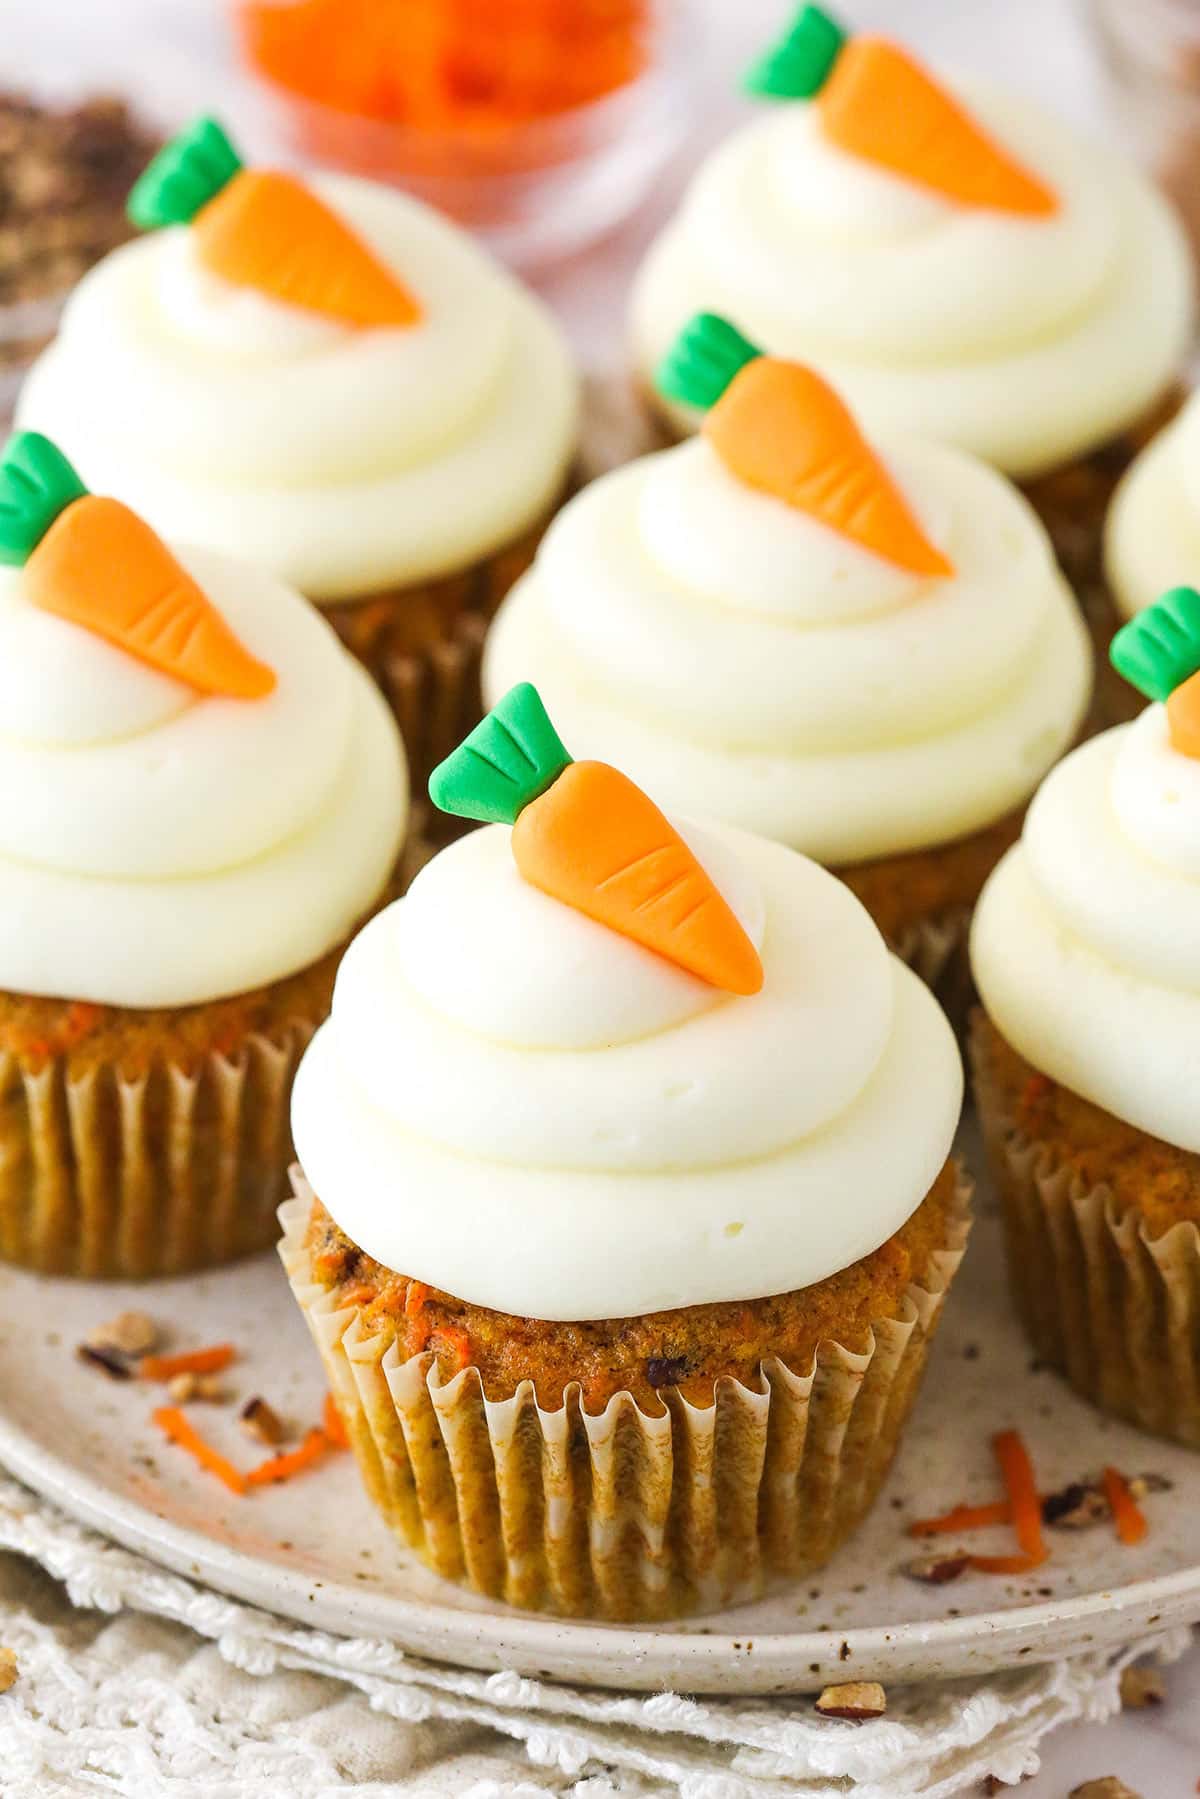 Carrot cake cupcakes on a serving platter.